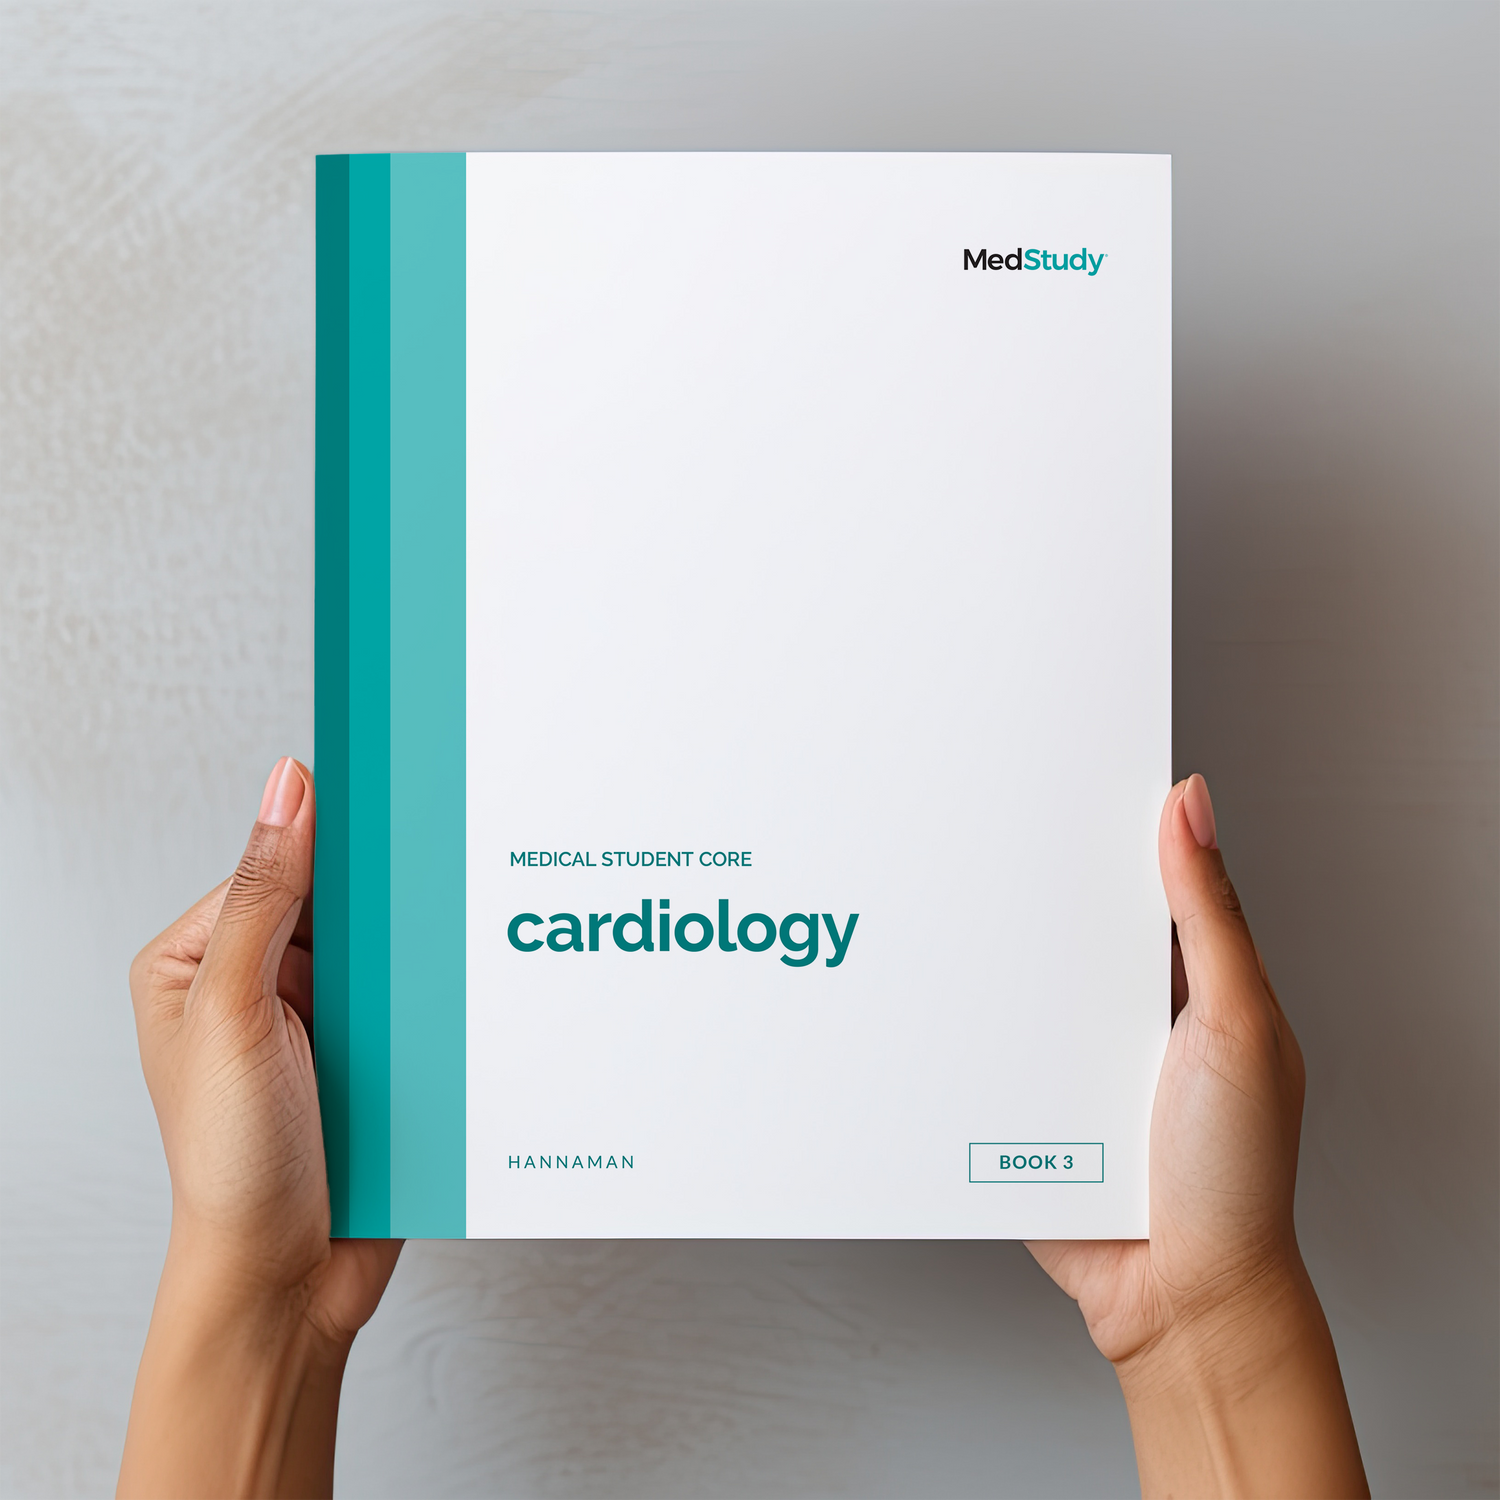 Hands holding the medical student core Cardiology book